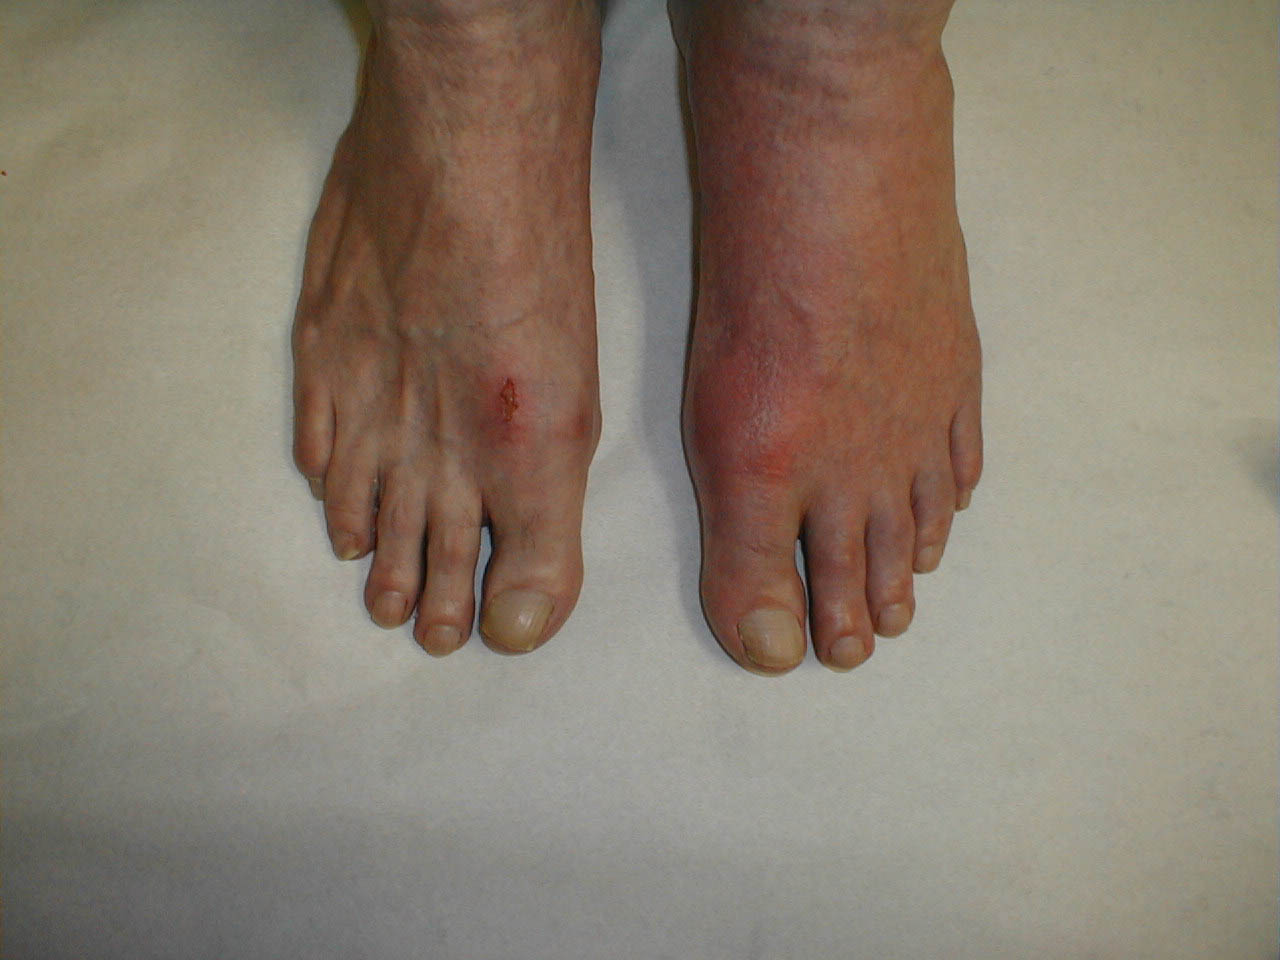 Gout of the Left Great Toe: Diffuse swelling and redness centered at the left MTP joint.